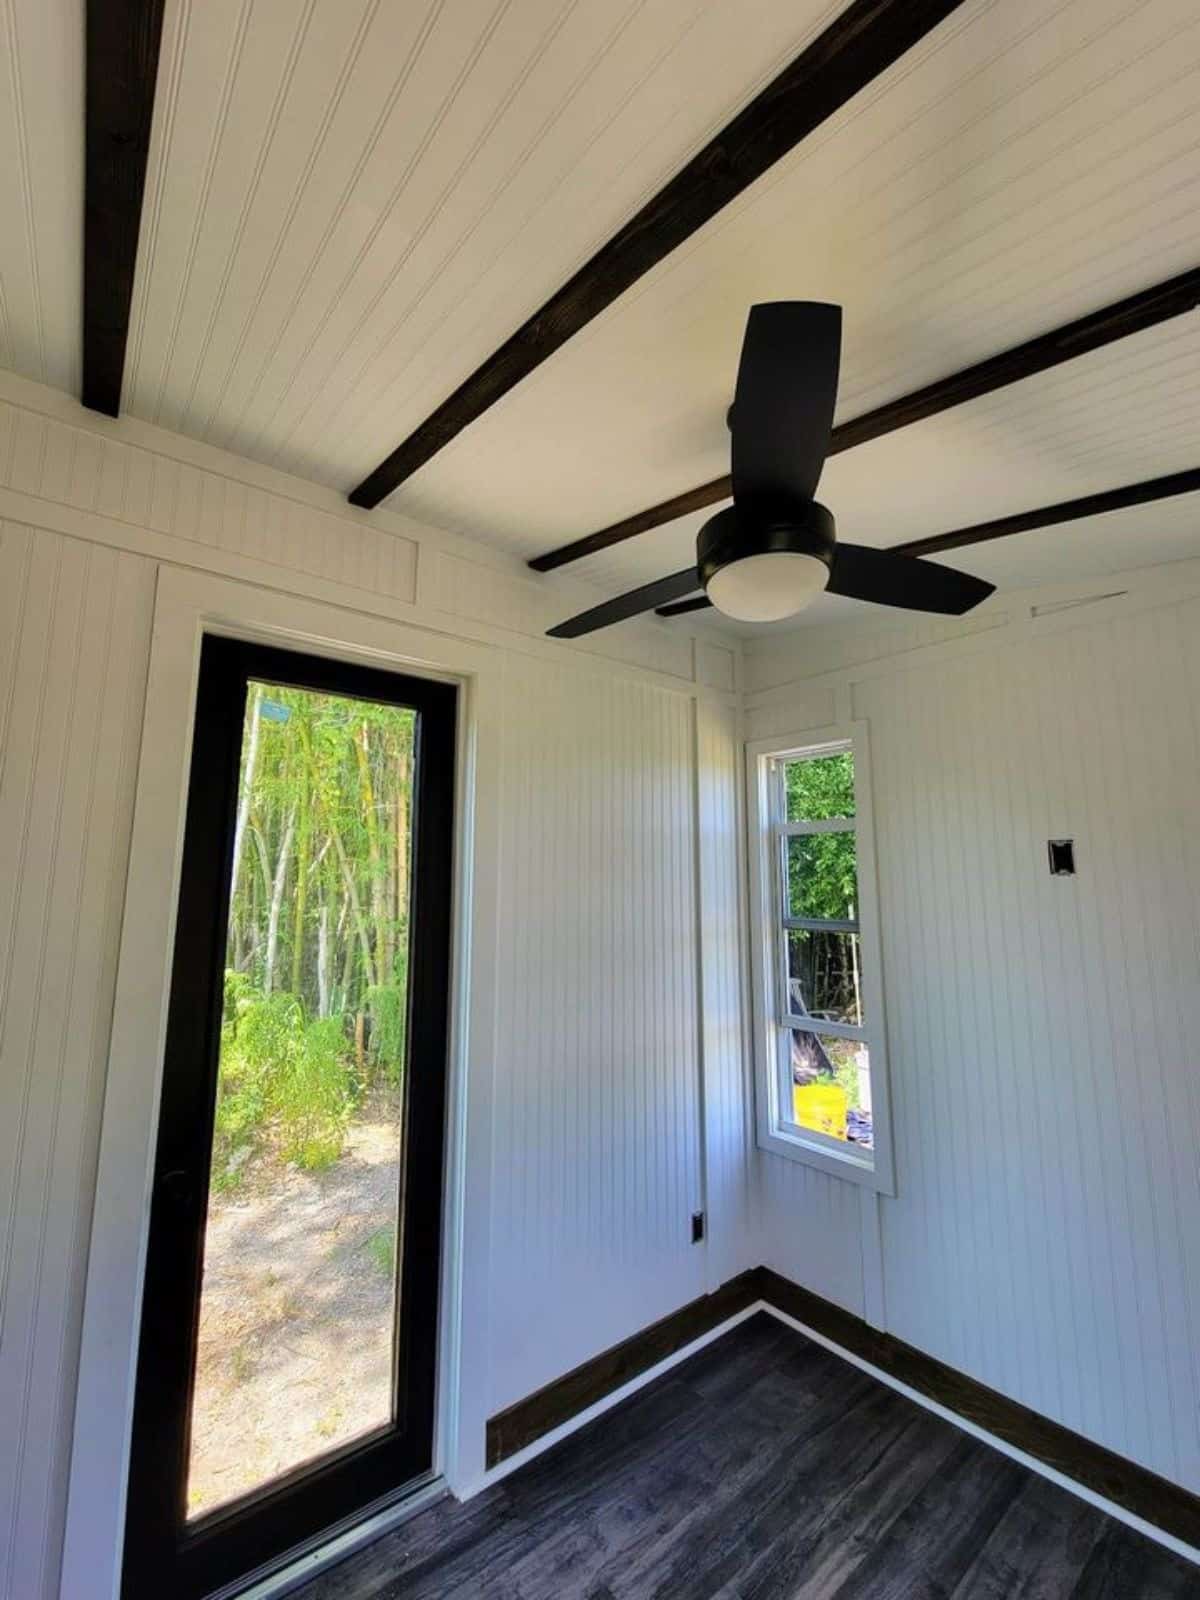 Entrance door of 200 sq ft Charming Tiny House can be the main entrance